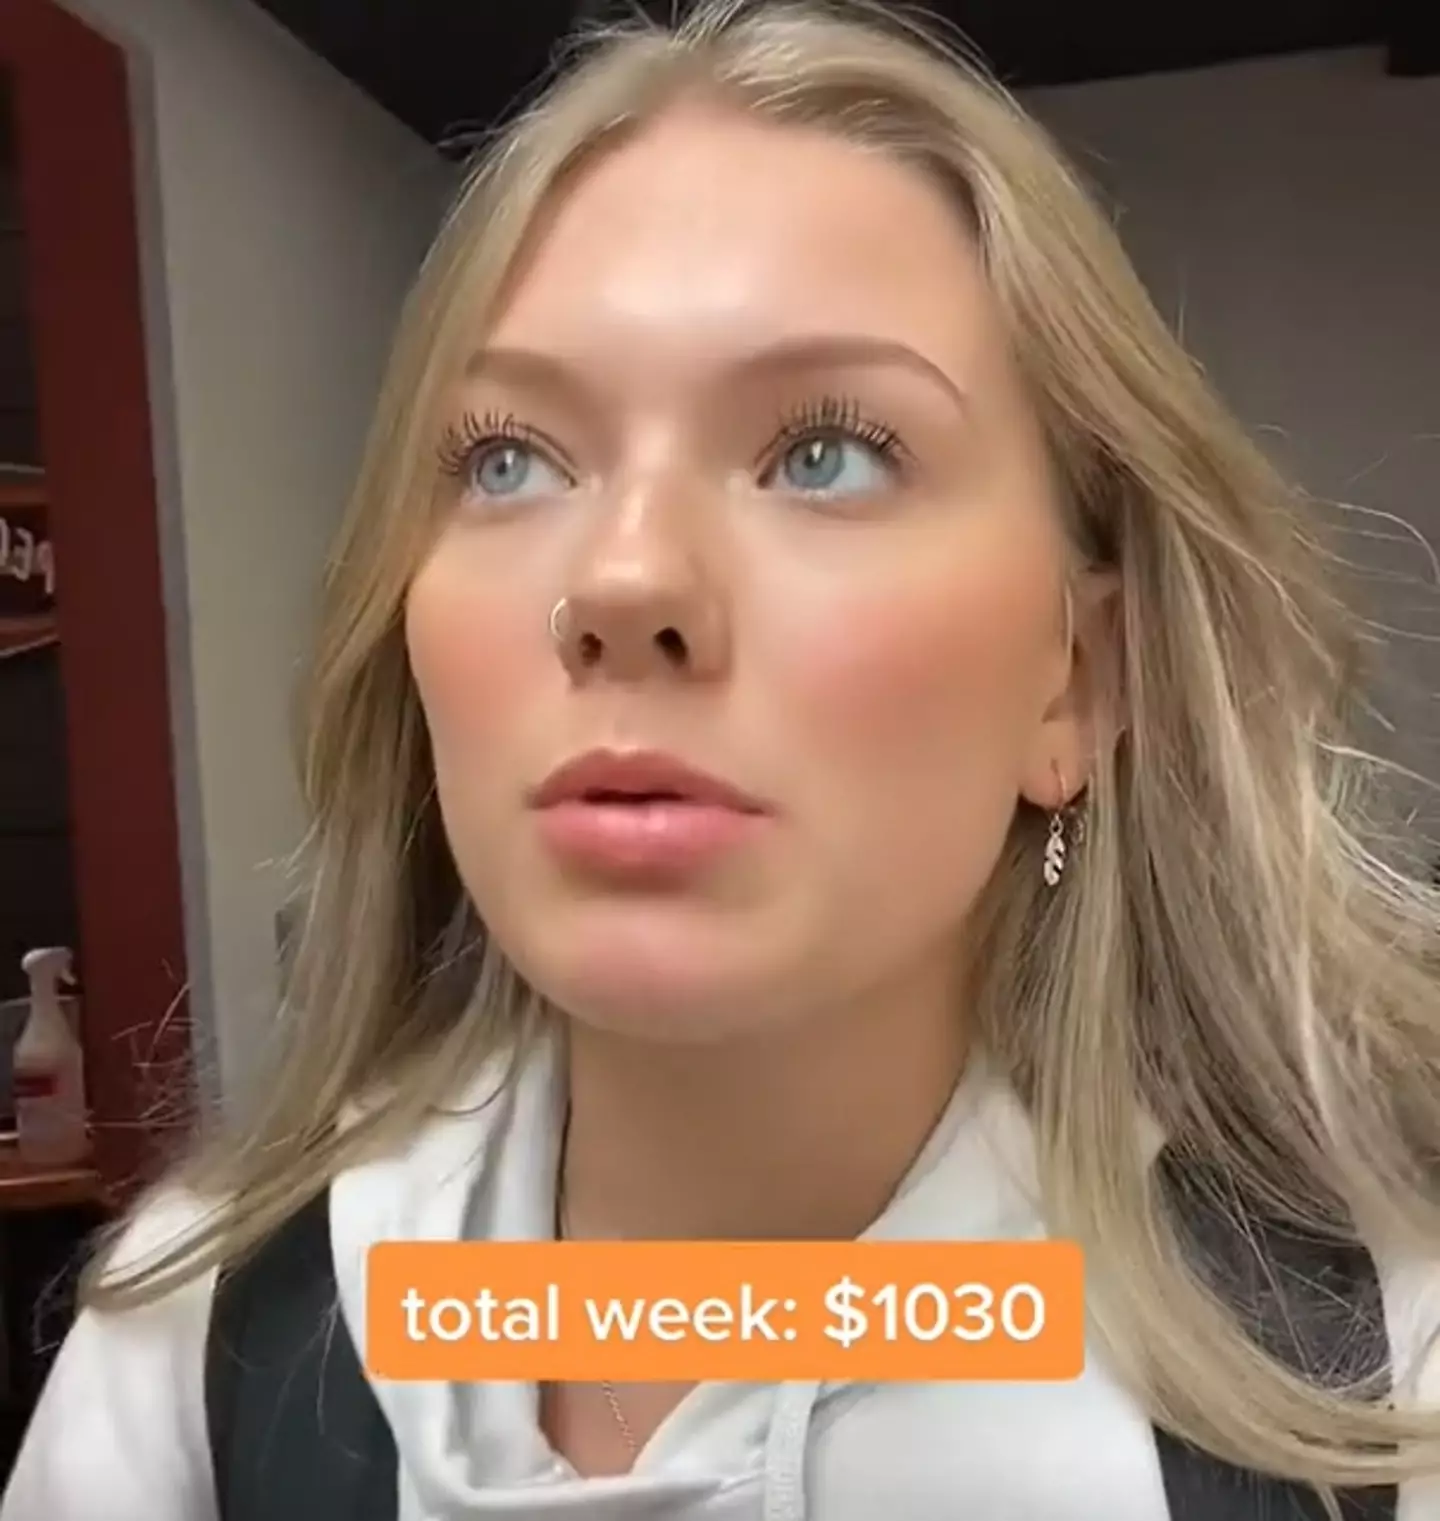 The waitress explained that earning $1030 in a week was a good week.